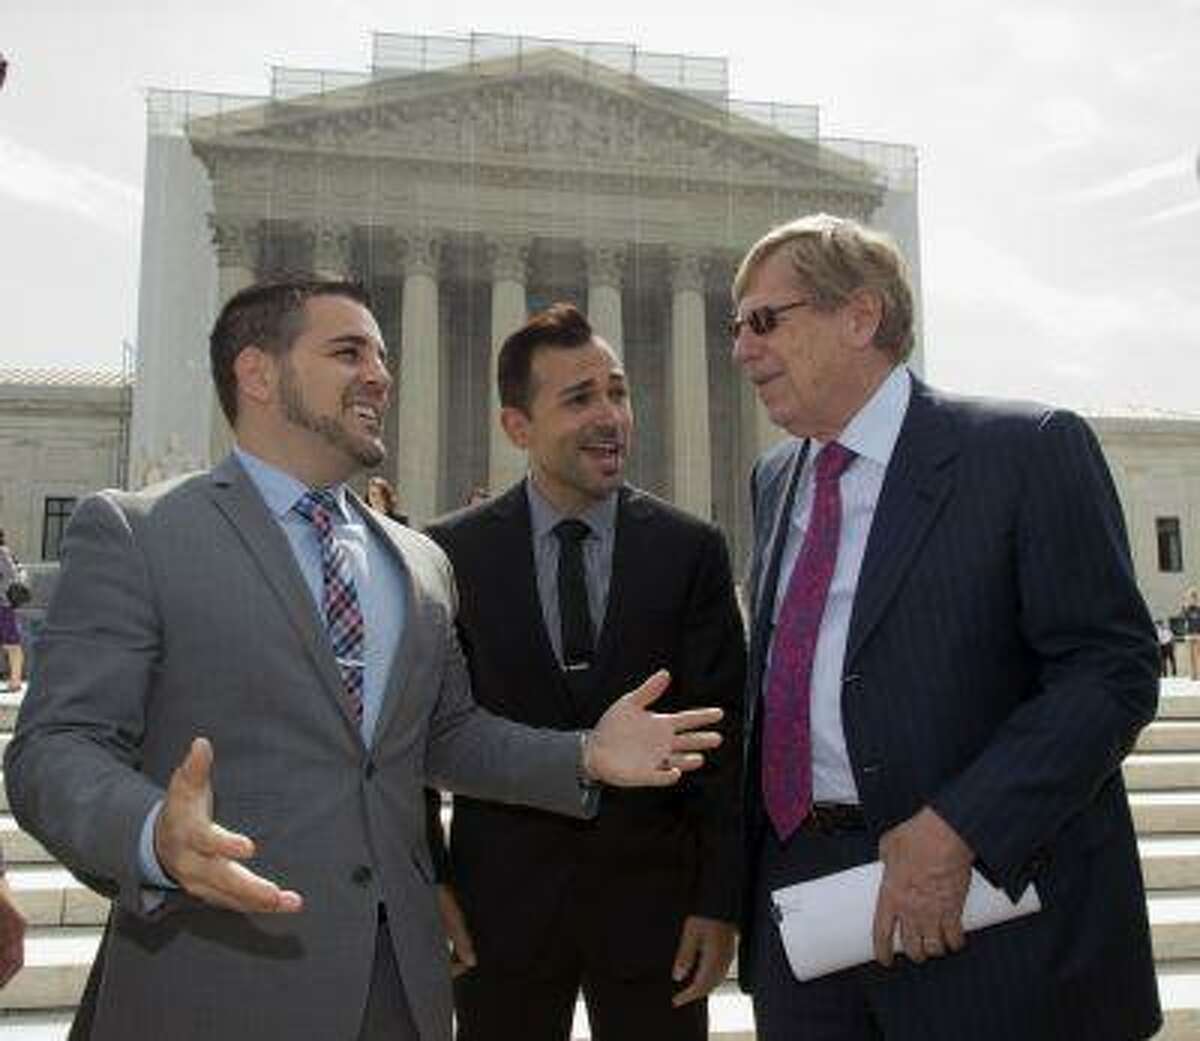 Ted Olson, right, attorney for the Proposition 8 plaintiffs, Jeff Zarrillo, left, and Paul Katami, center, talk outside the Supreme Court in Washington, Thursday, June 20, 2013, as they leave after a decision in their case on gay marriage, Hollingsworth v. Perry, was not announced today. With only a few days remaining in the court's term, several major cases are still outstanding that could have widespread political impact on same-sex marriage, voting rights, and affirmative action. (AP Photo/J. Scott Applewhite)